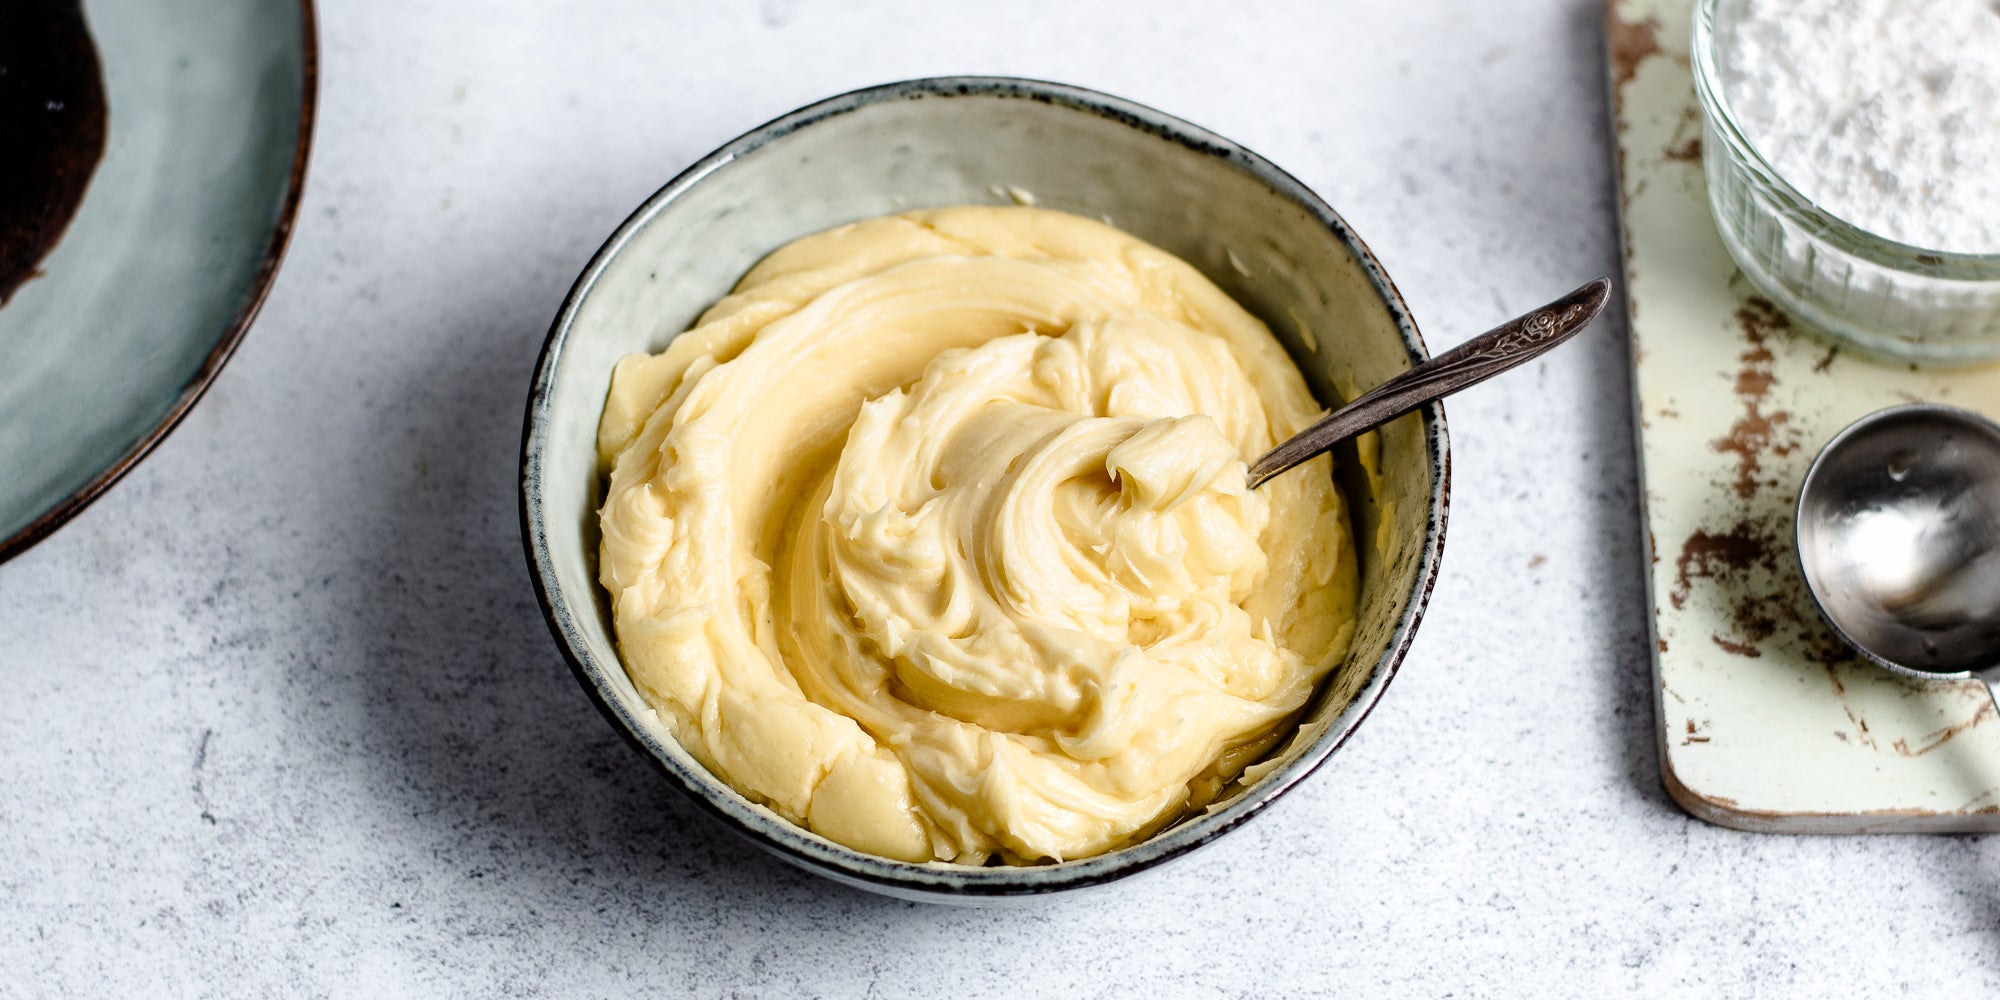 Top view of Brandy Butter in a mixing bowl with a spoon